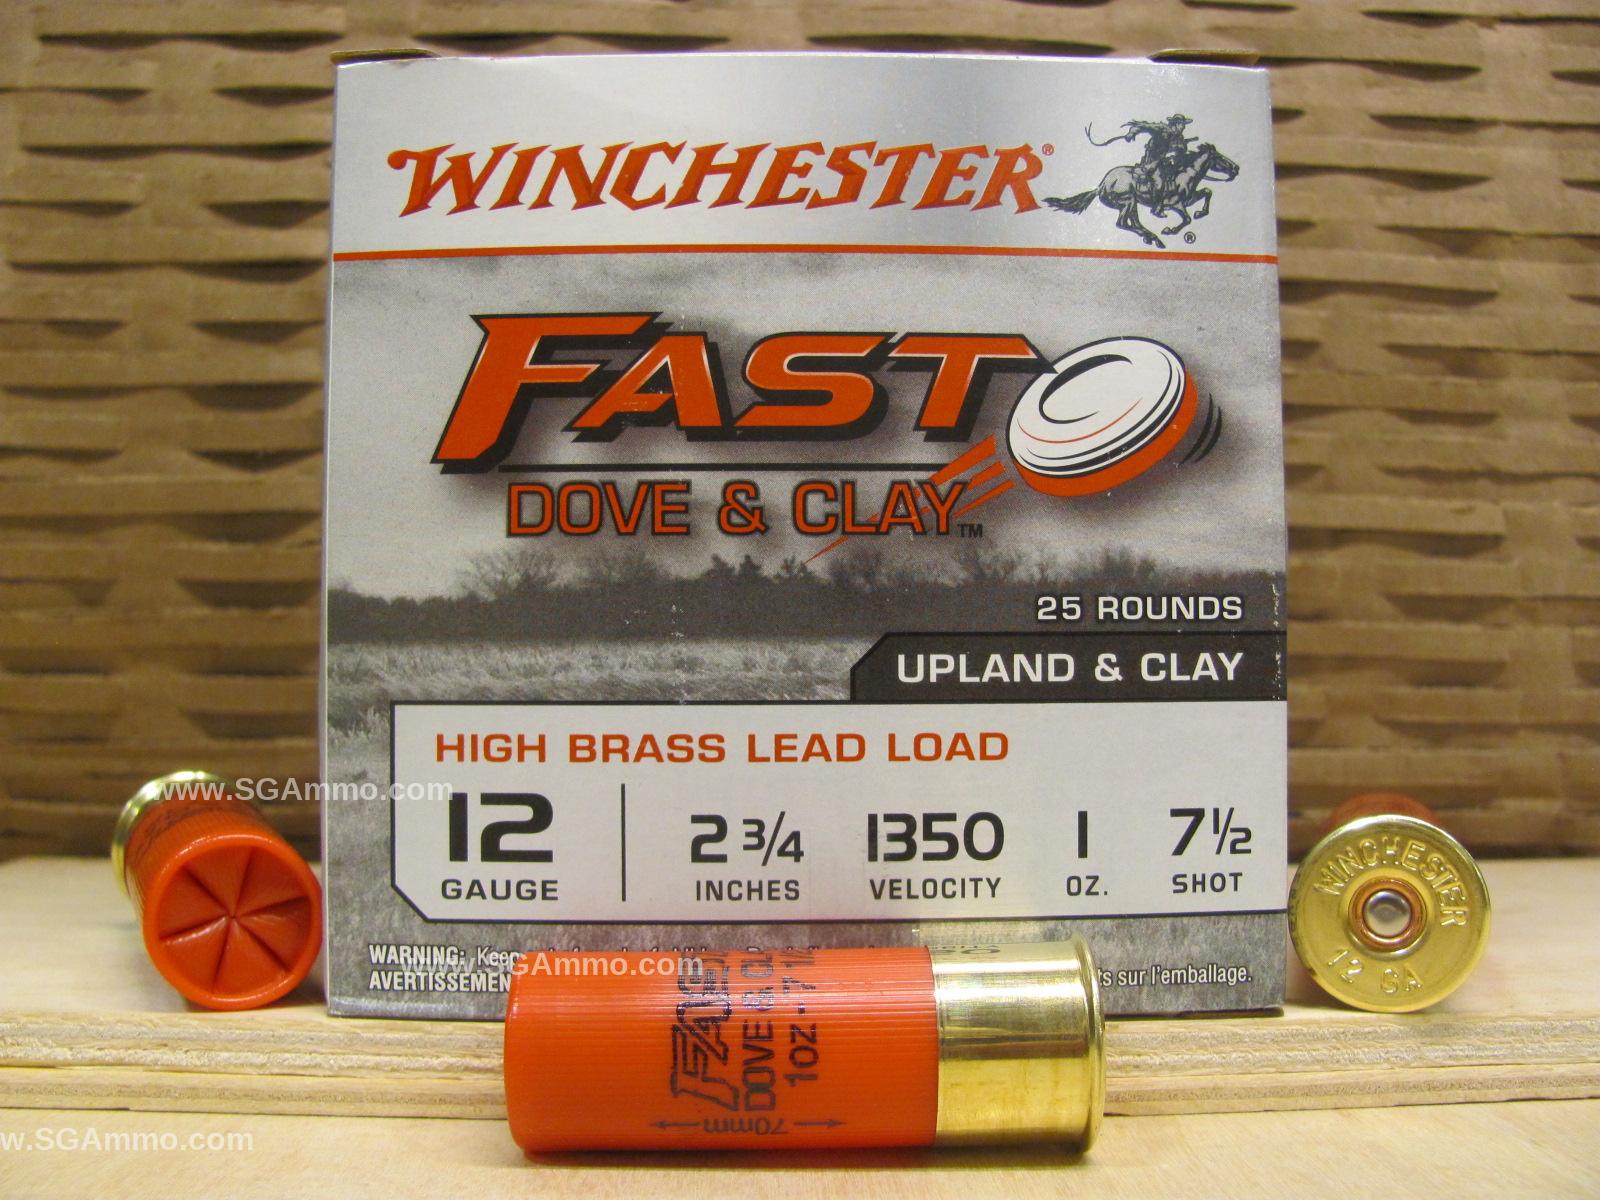 25 Round Box - 12 Gauge 2.75 Inch 1 Ounce 7.5 Shot Winchester High Brass  Lead Load Dove and Clay Ammo - WFD127B